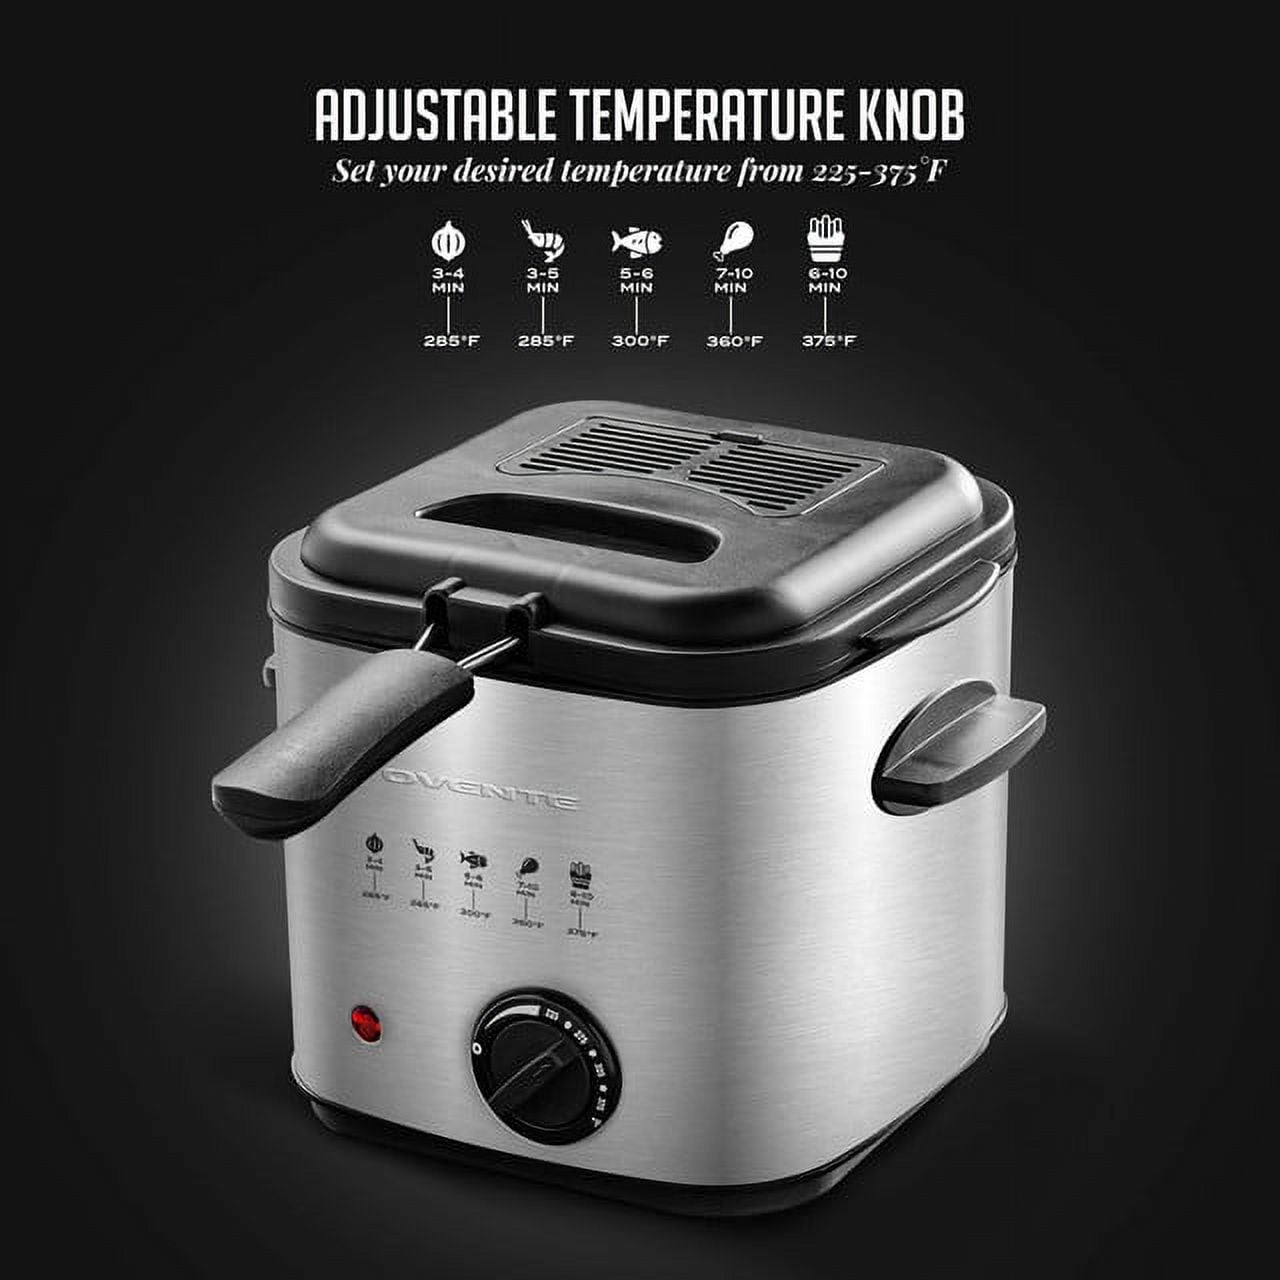 Ovente Electric Deep Fryer 2 Liter, 1500W with Viewing Window, Adjustable Temperature Knob and Removable Stainless Steel Frying Basket, Perfect for